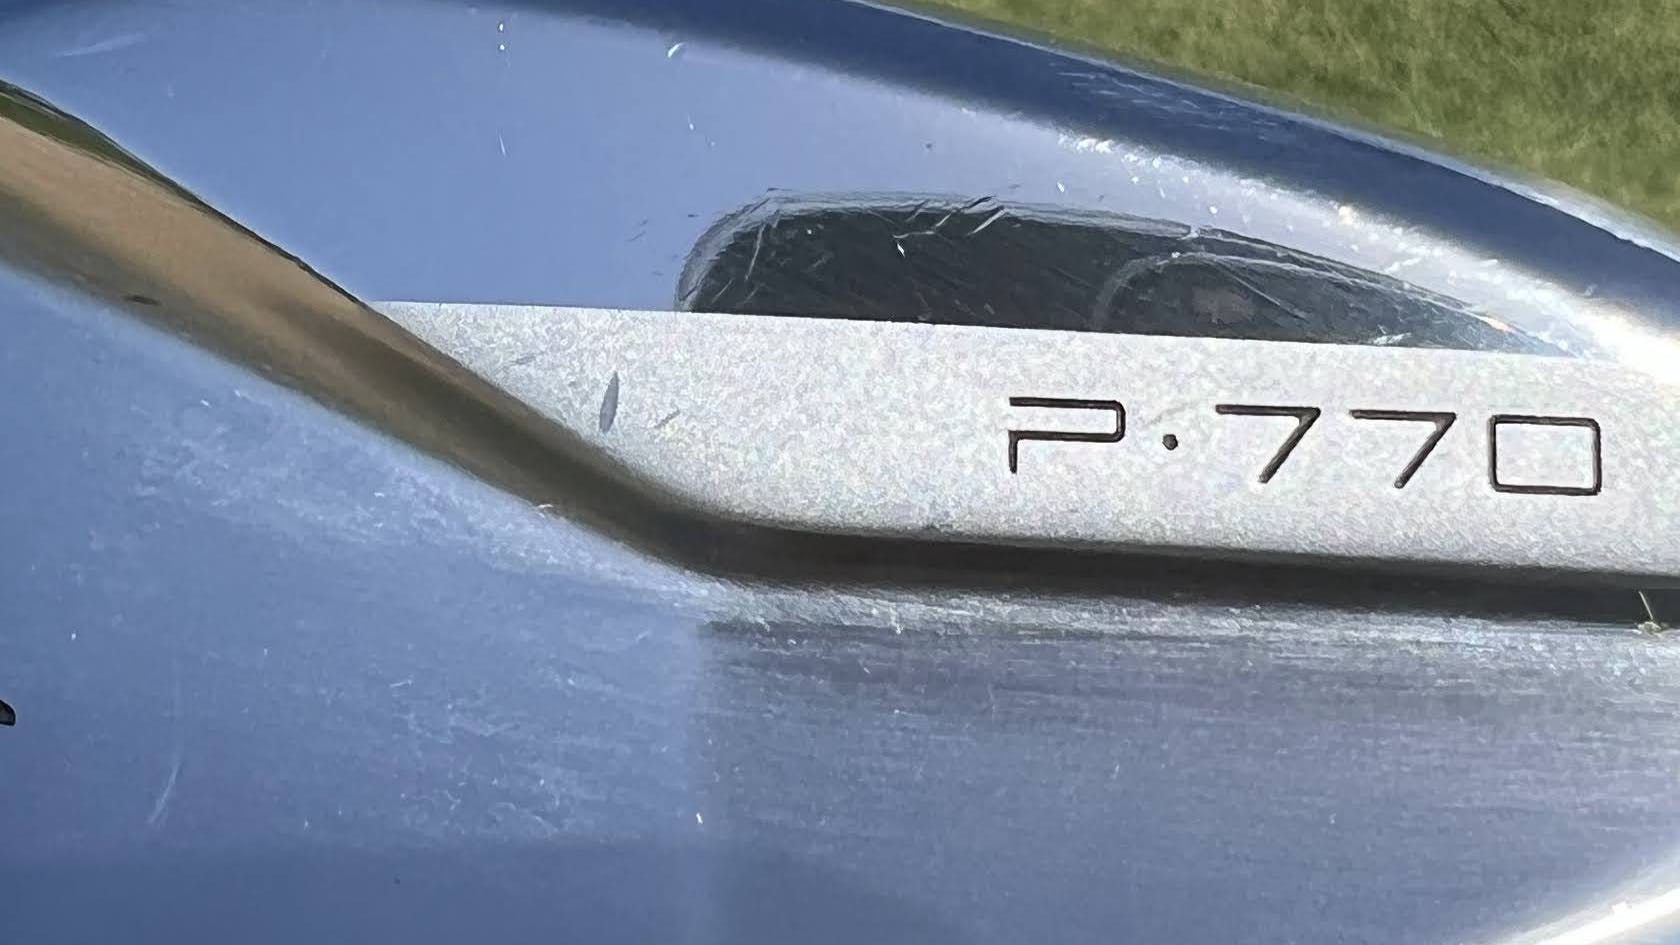 Head of the TaylorMade P770 Iron.